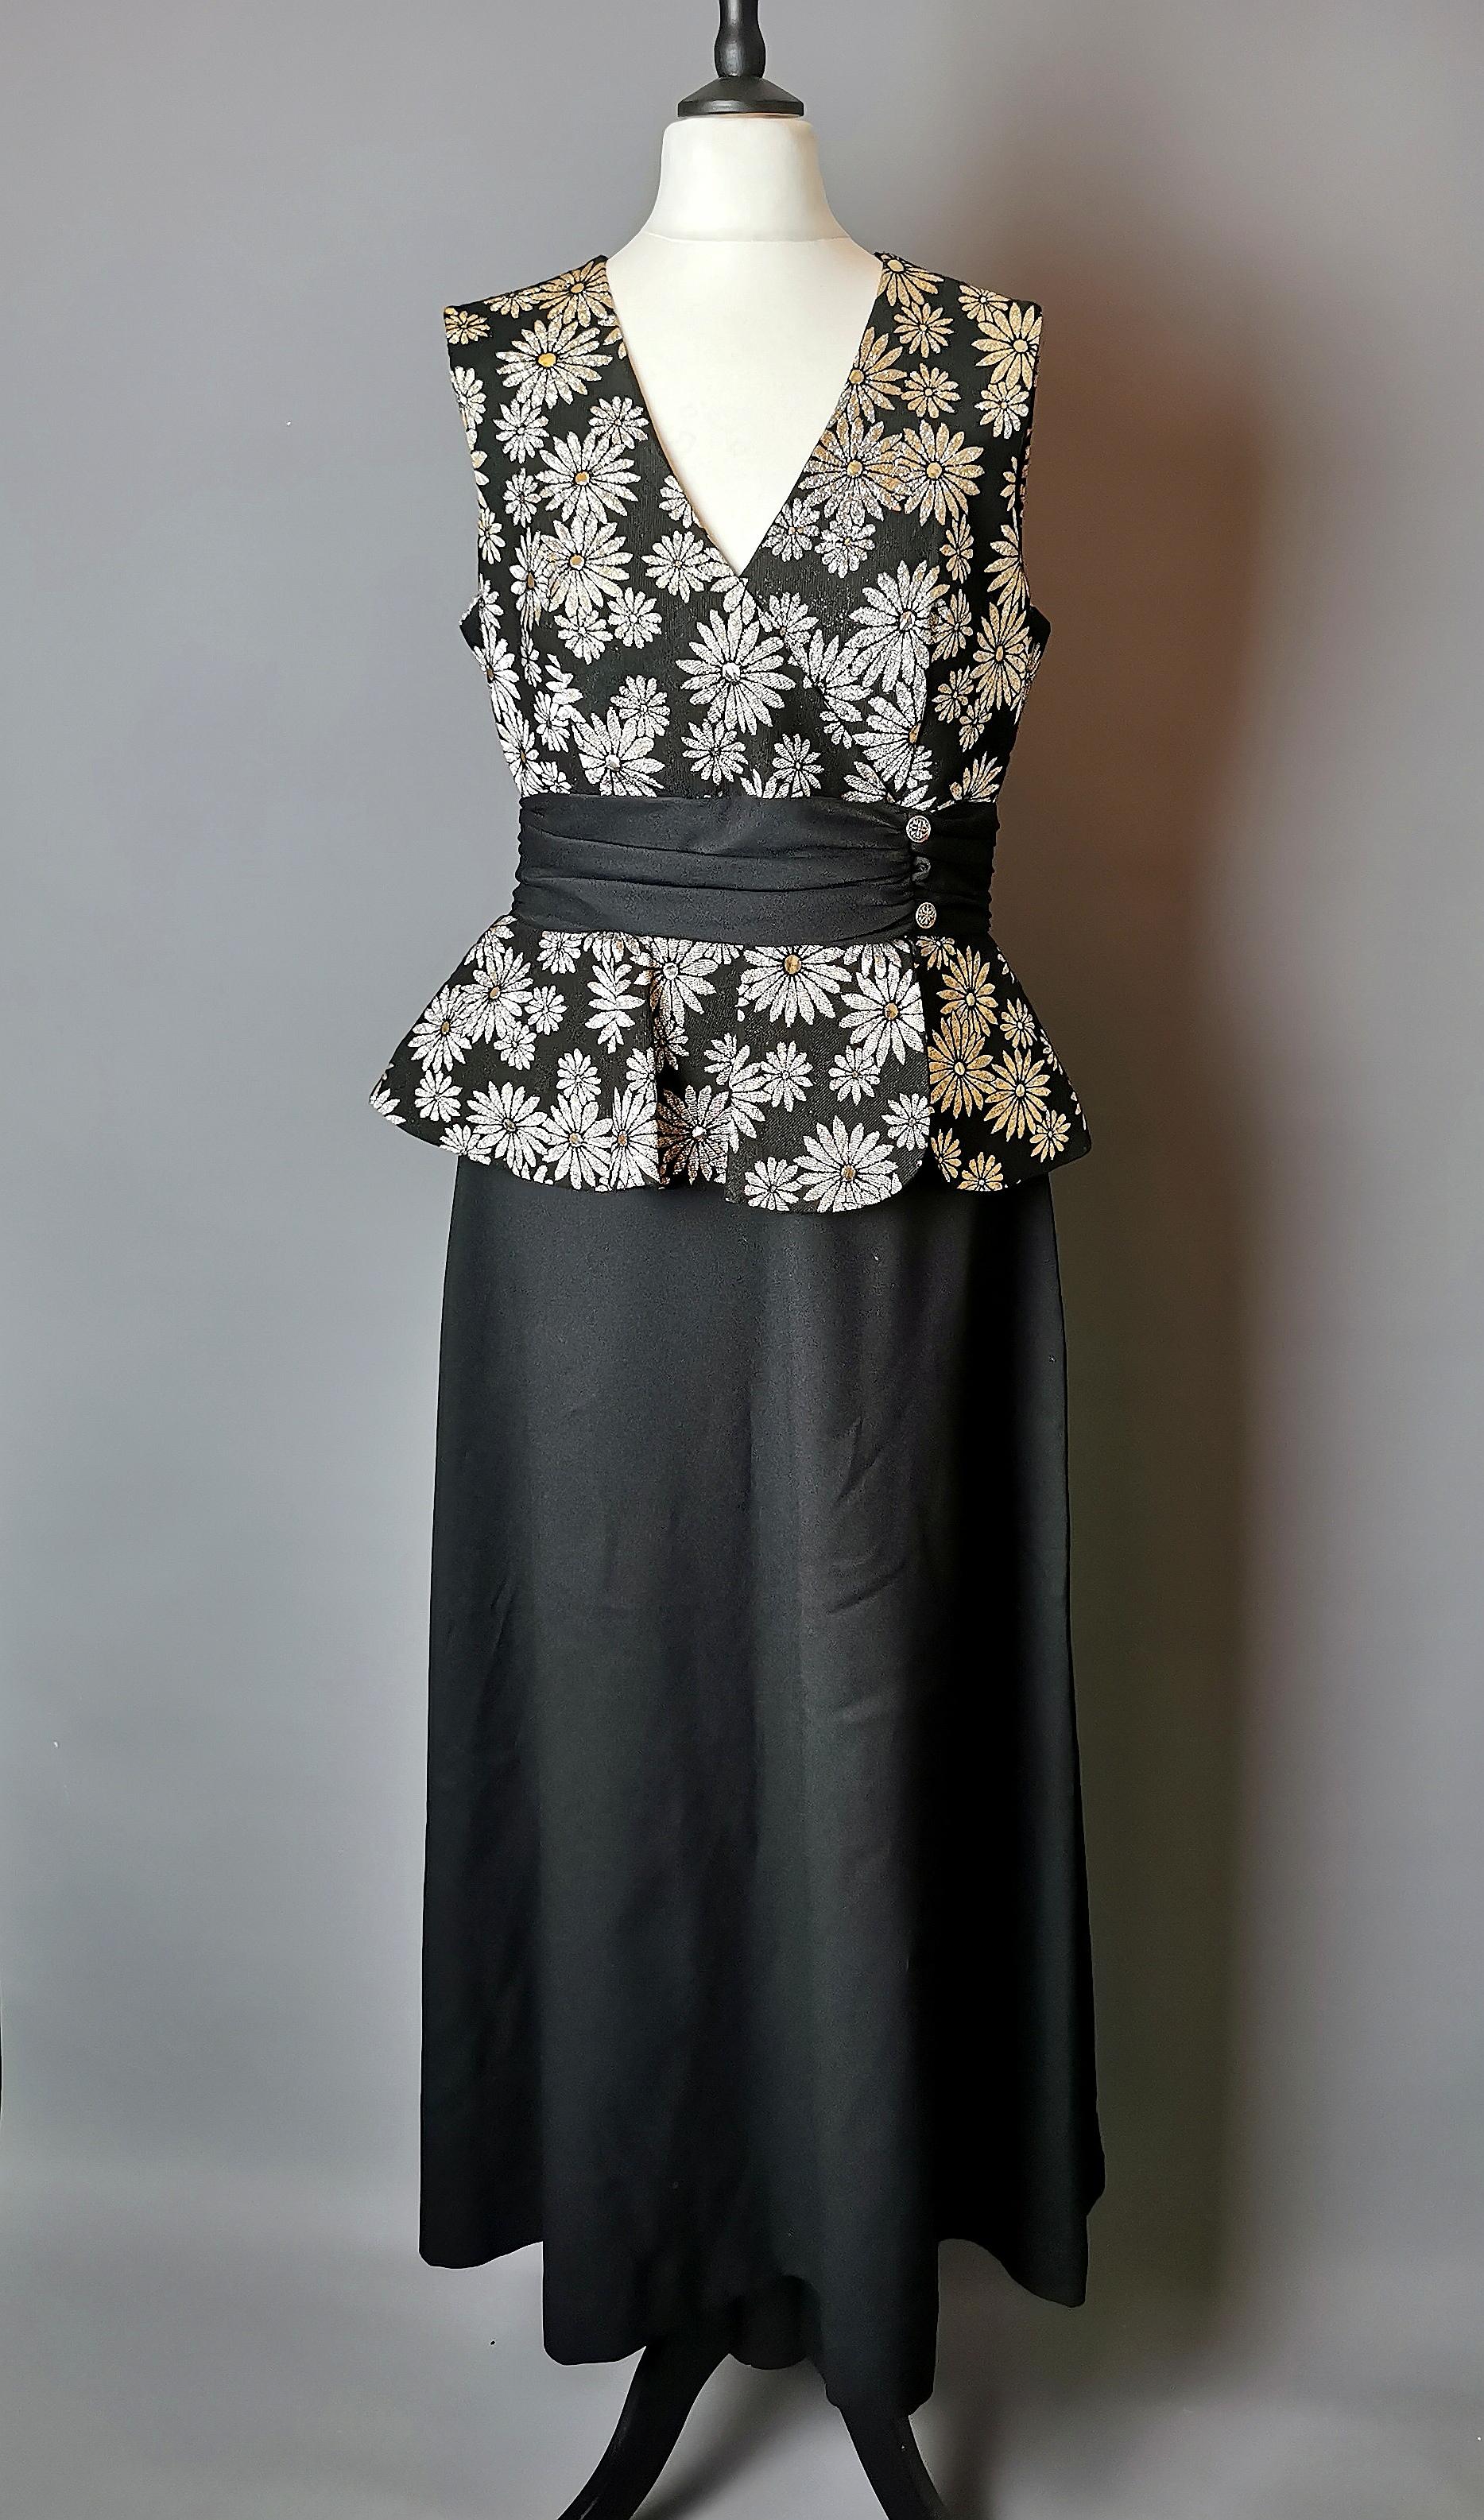 A gorgeous vintage 1960s Gold and silver floral Brocade dress.

A figure hugging dress with a pencil silhouette in black with a gold and silver brocade bodice with a sash and peplum waist.

It is made from a synthetic fabrics including polyester and